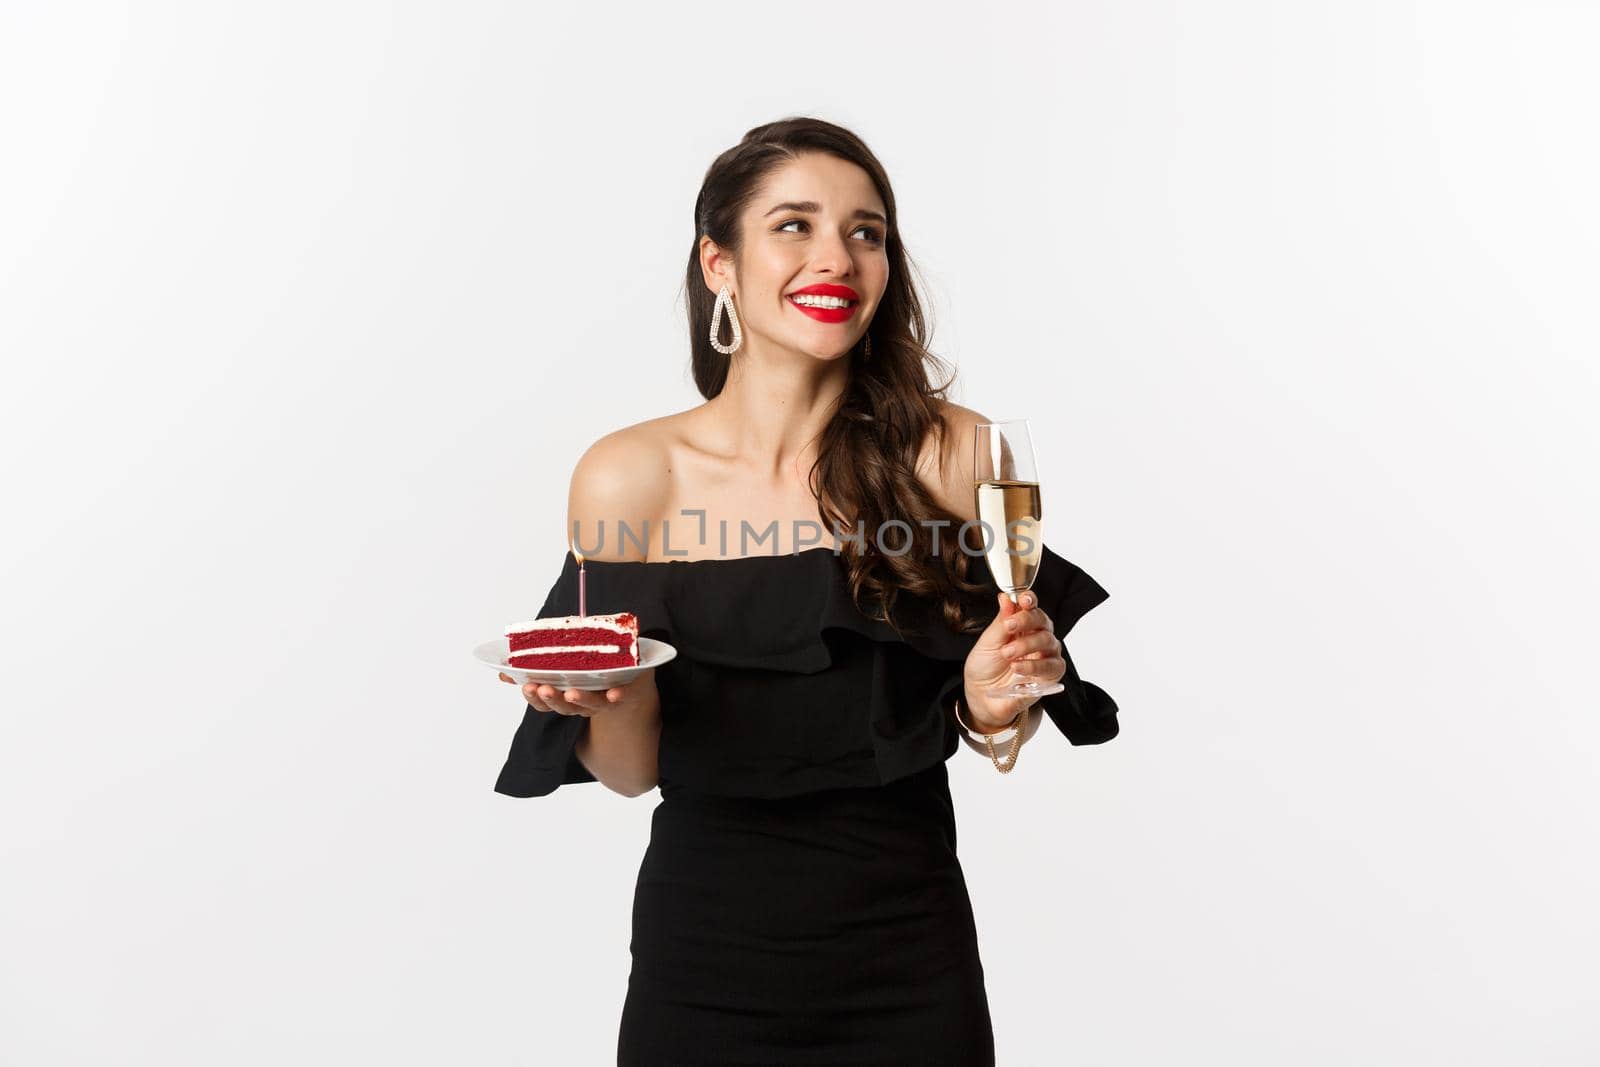 Celebration and party concept. Fashionable woman holding birthday cake with candle and drinking champagne, smiling and looking aside, standing over white background.